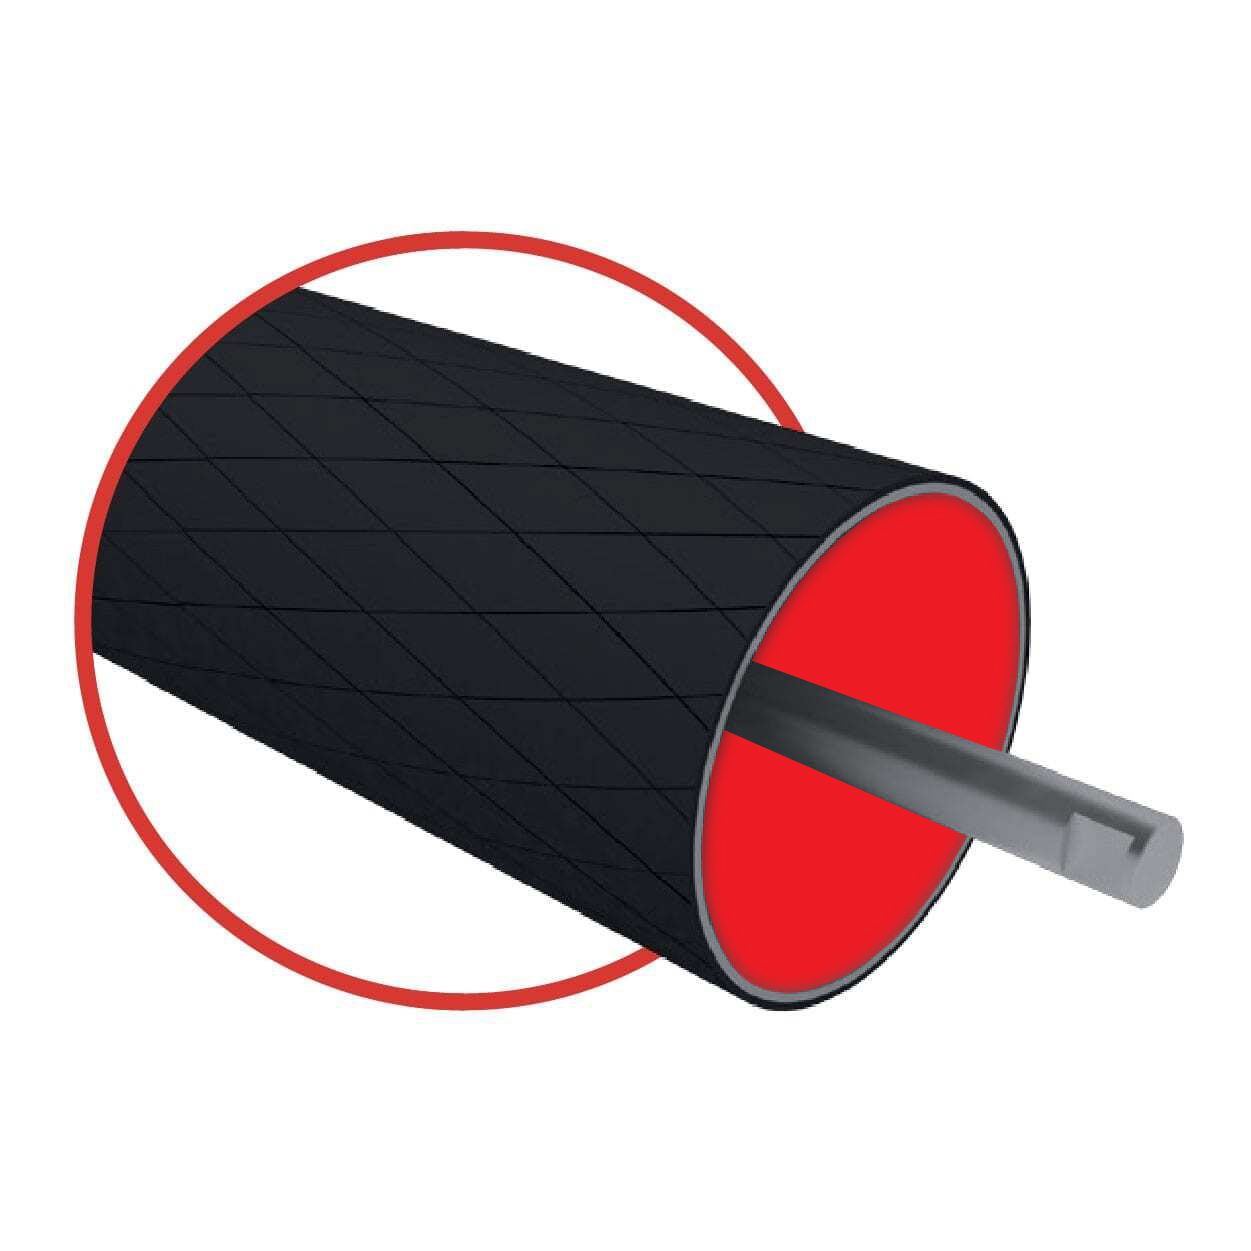 Illustration of a black cylindrical object with a red interior and a gray rod running through its center. The object, resembling belt tracking rollers, features diagonal lines on its surface and is surrounded by a red circle.